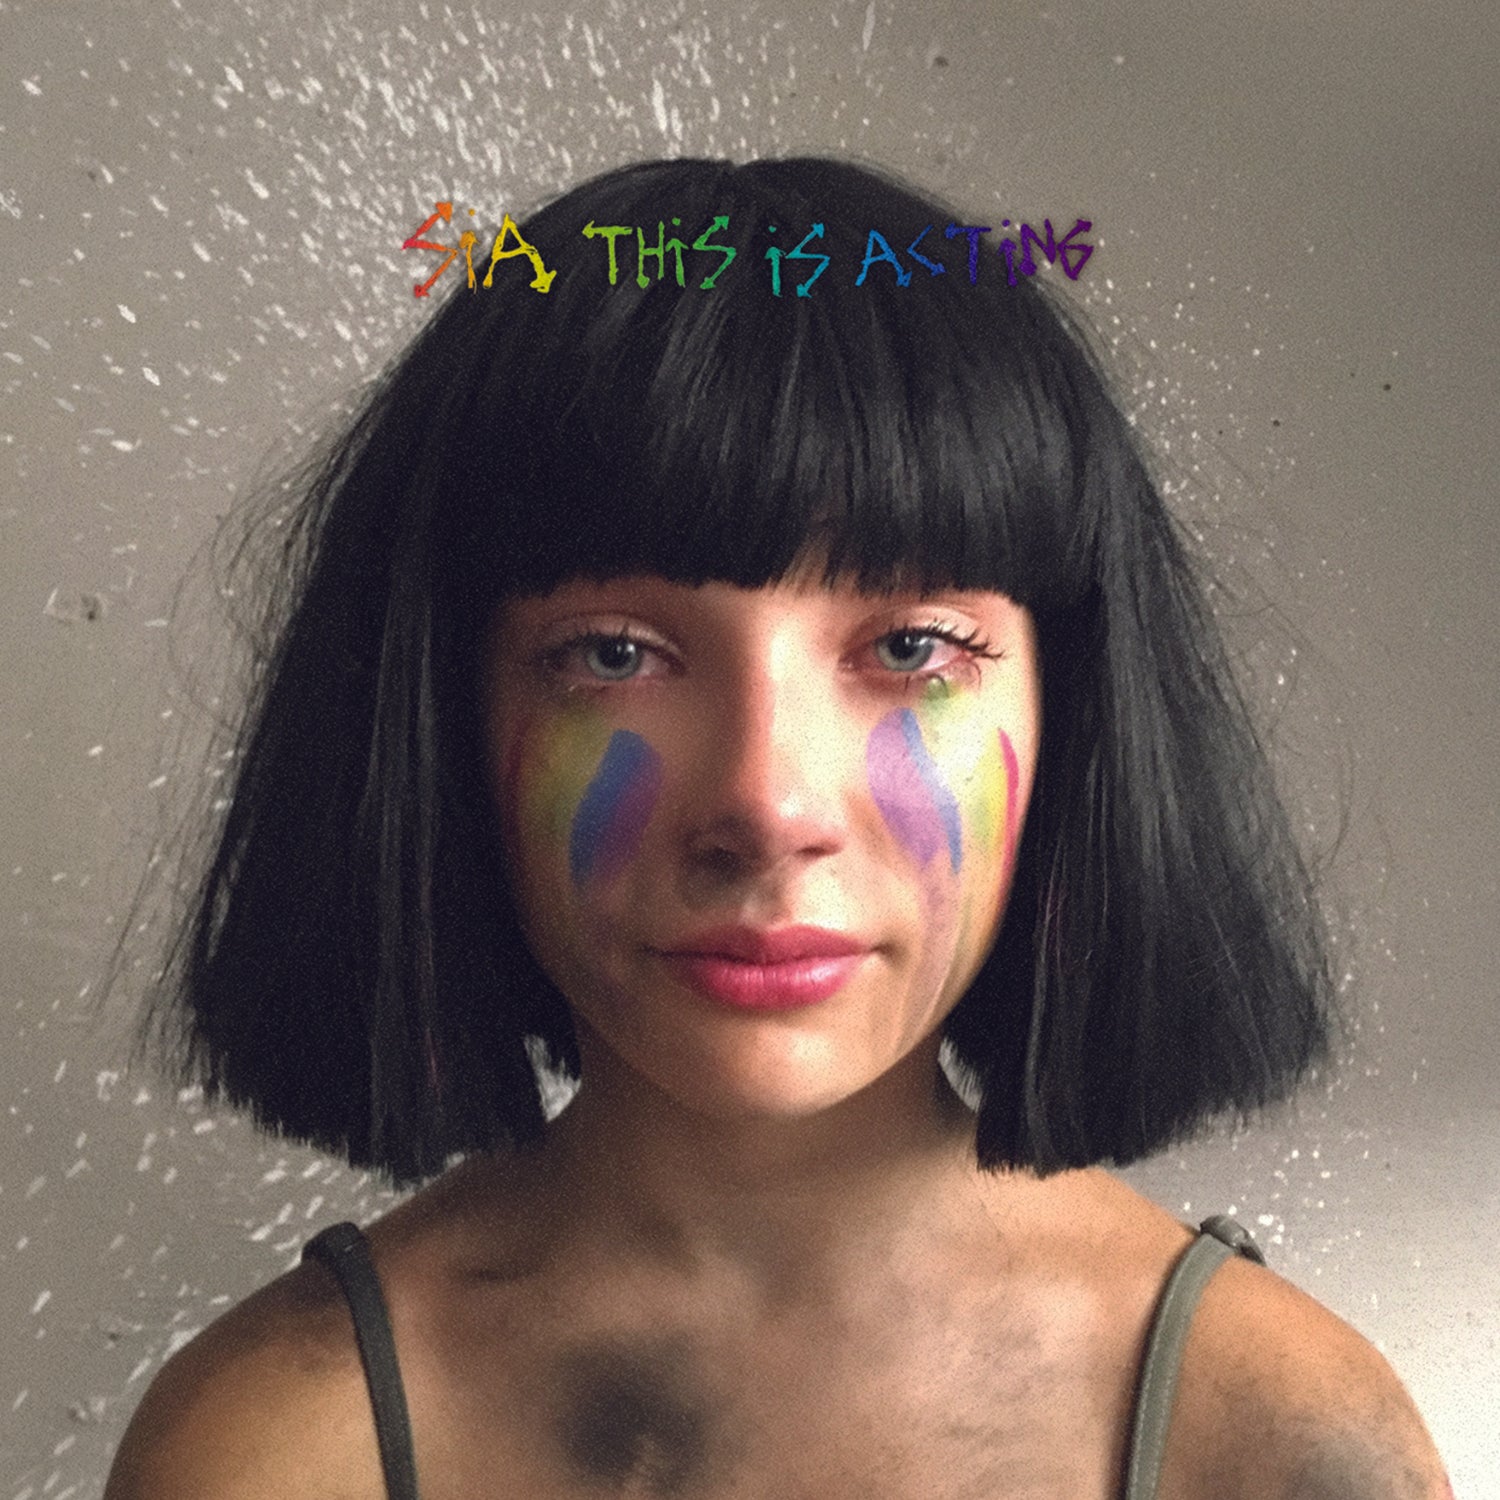 This Is Acting - SIA 